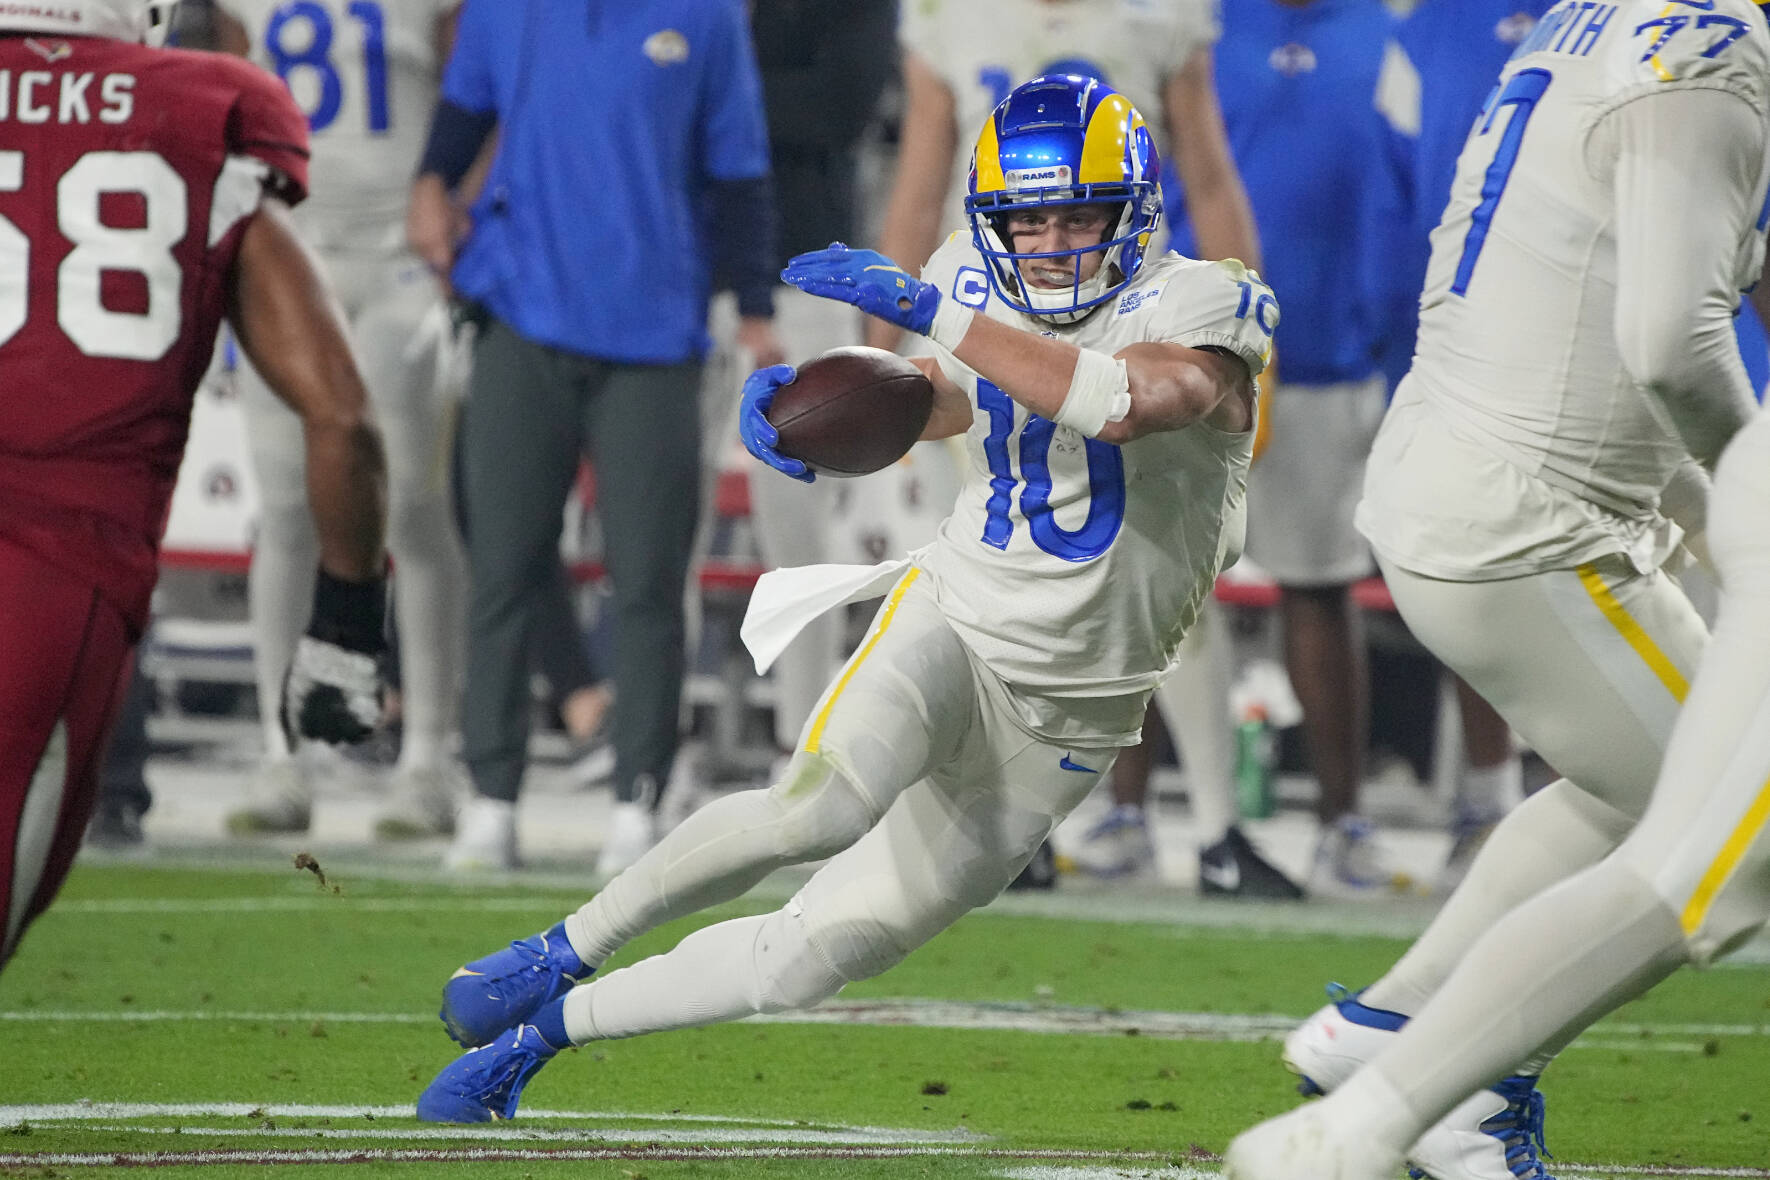 Los Angeles Rams wide receiver Cooper Kupp (10) during an NFL football game against the Arizona Cardinals on Dec. 13 in Glendale, Ariz. Kupp is from Yakima, played at Eastern Washington and his family has ties to both the University of Washington and Pacific Lutheran. (AP Photo/Rick Scuteri)